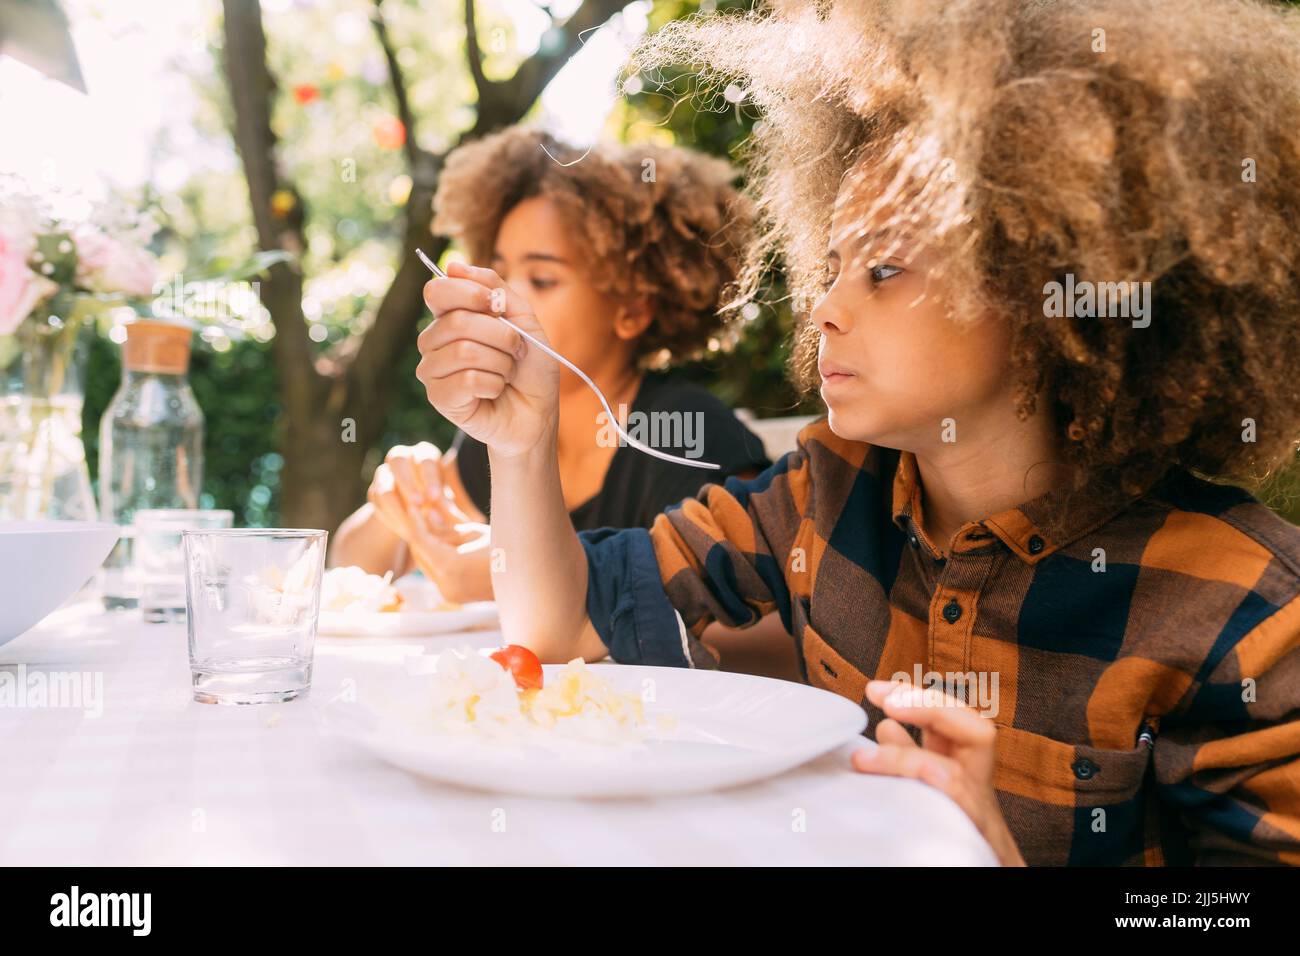 Boy with sister eating lunch at dining table in yard Stock Photo